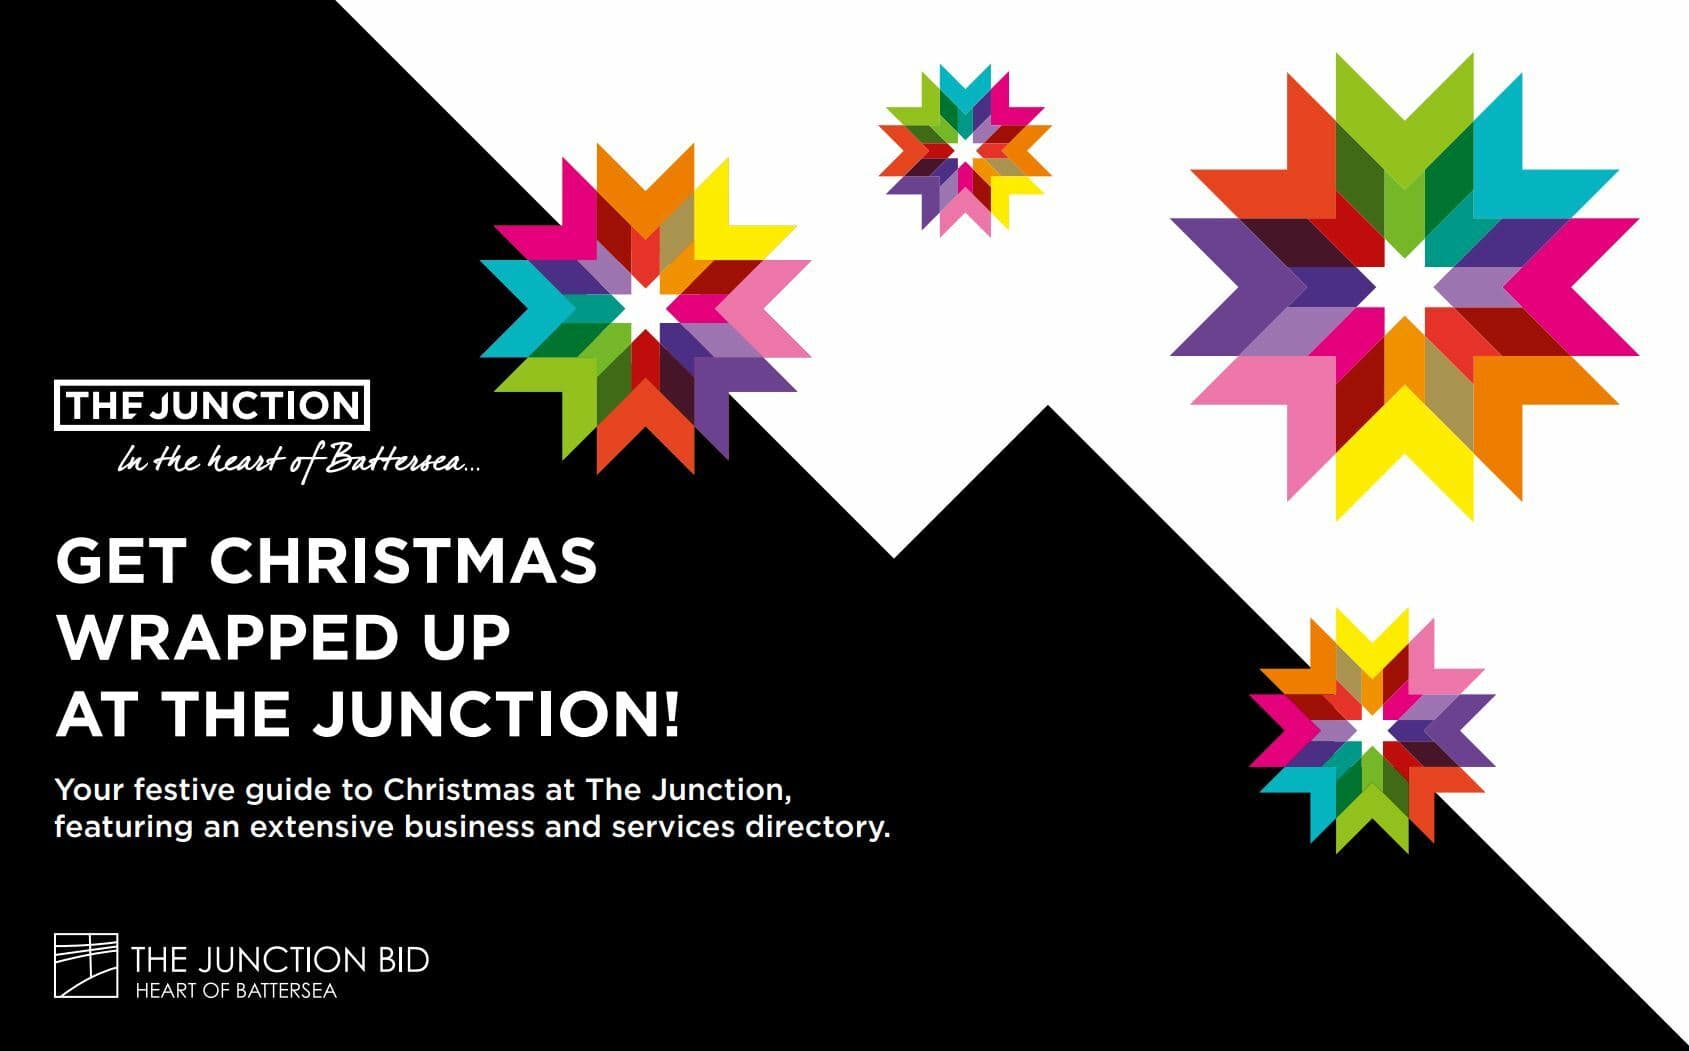 Get Christmas Wrapped Up at The Junction